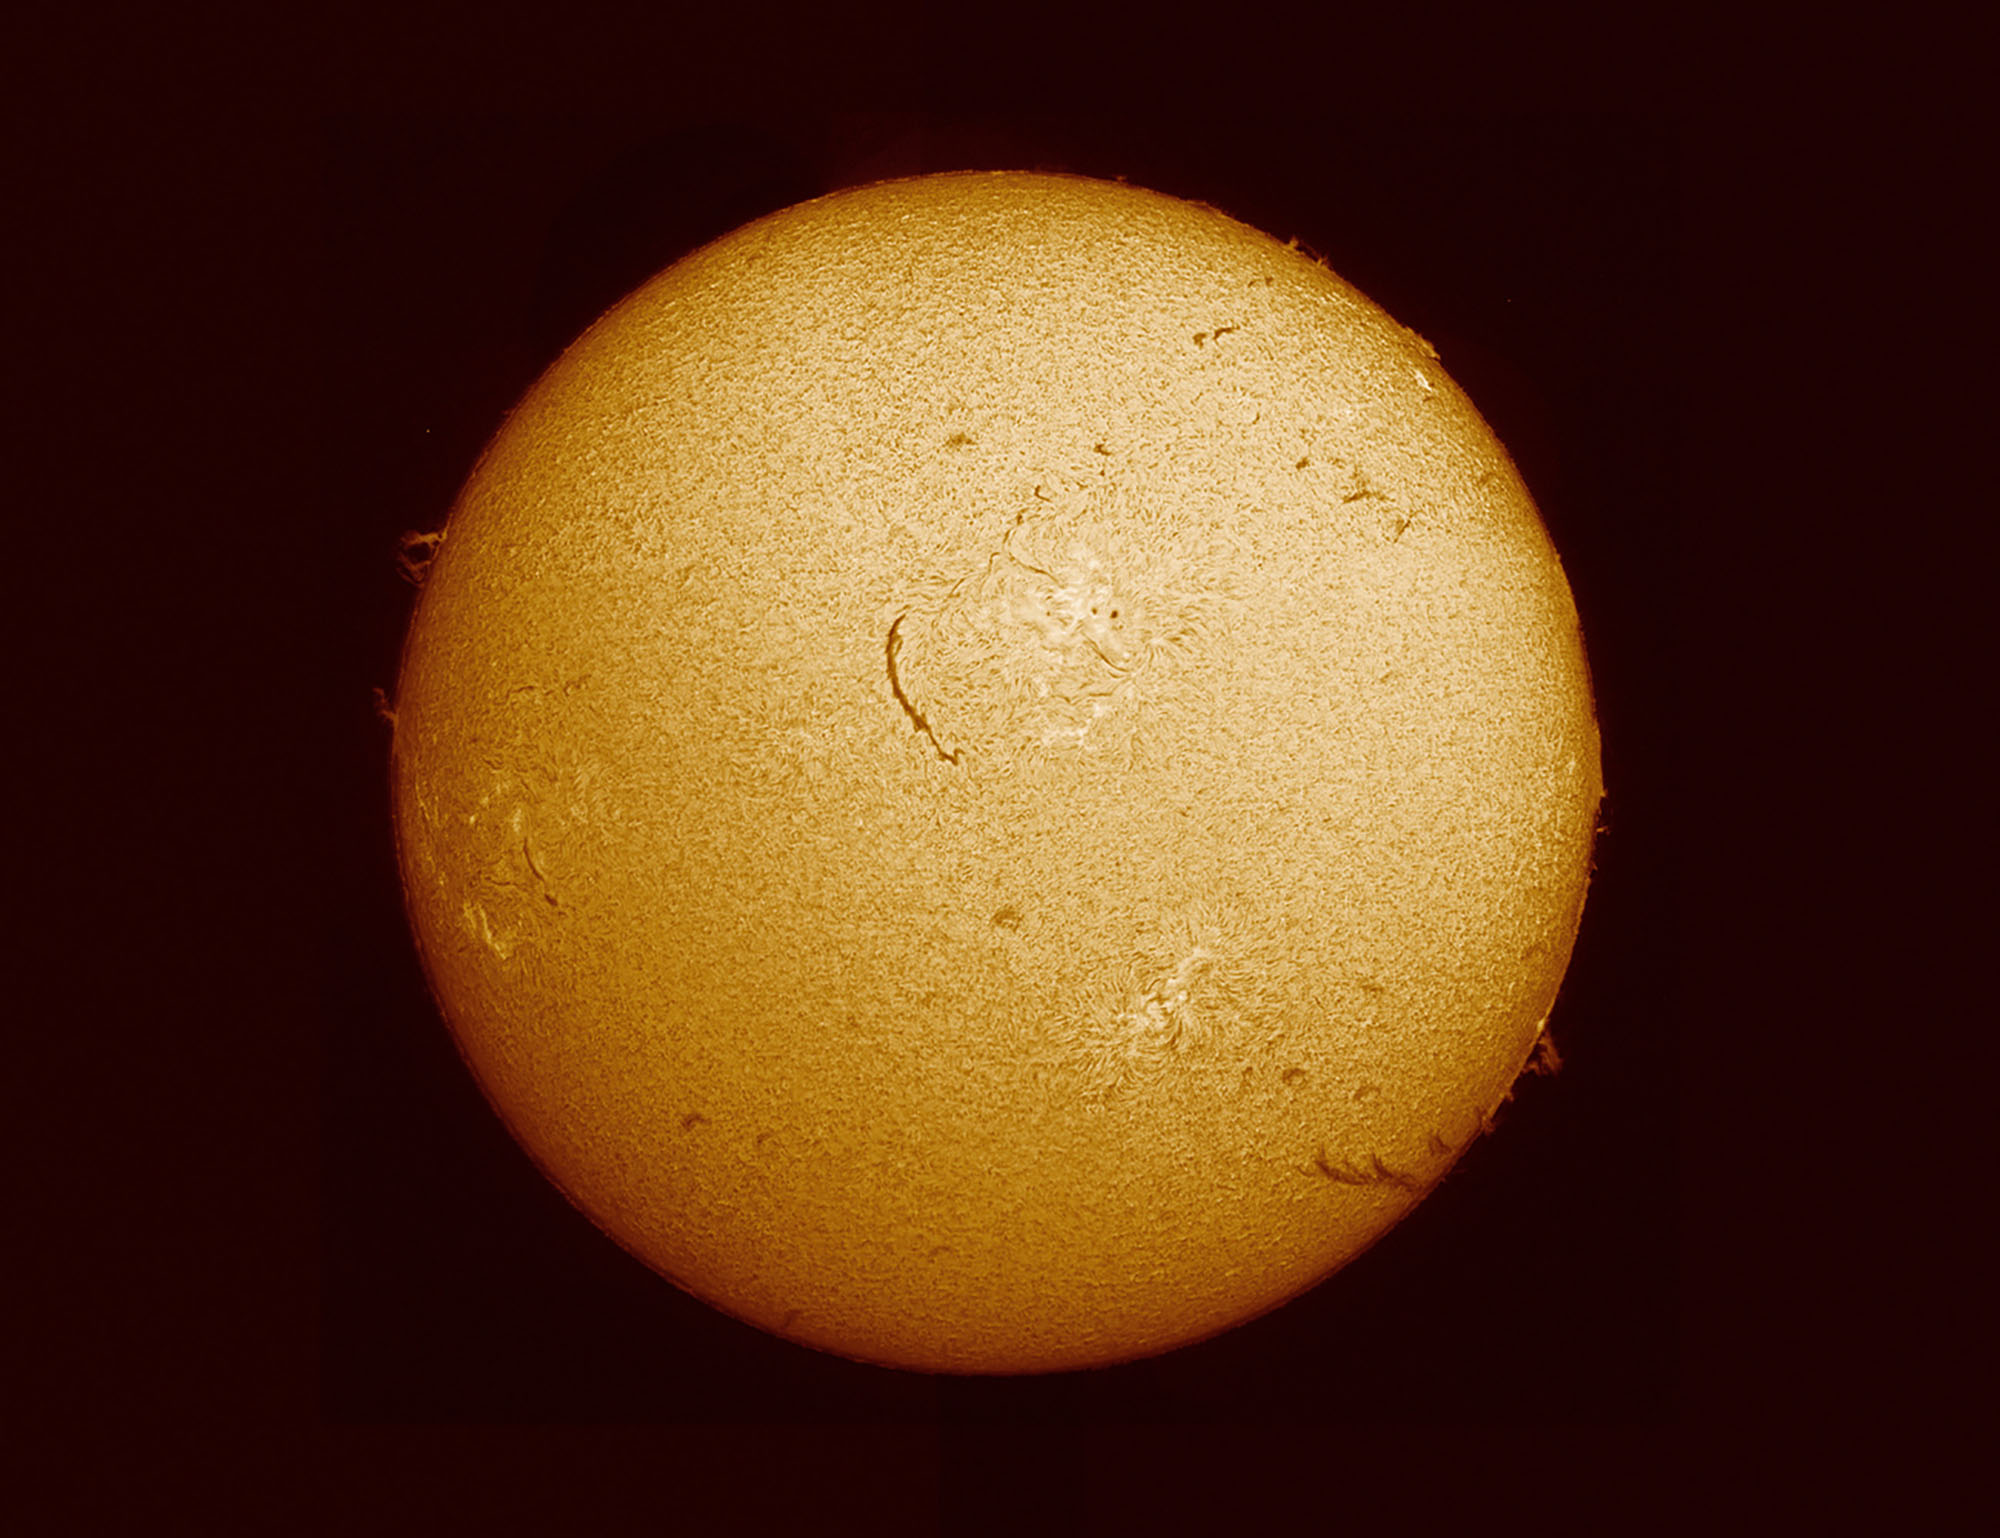 Image of the sun taken by Solar and Heliospheric Observatory (SOHO) and European Space Agency (ESA).